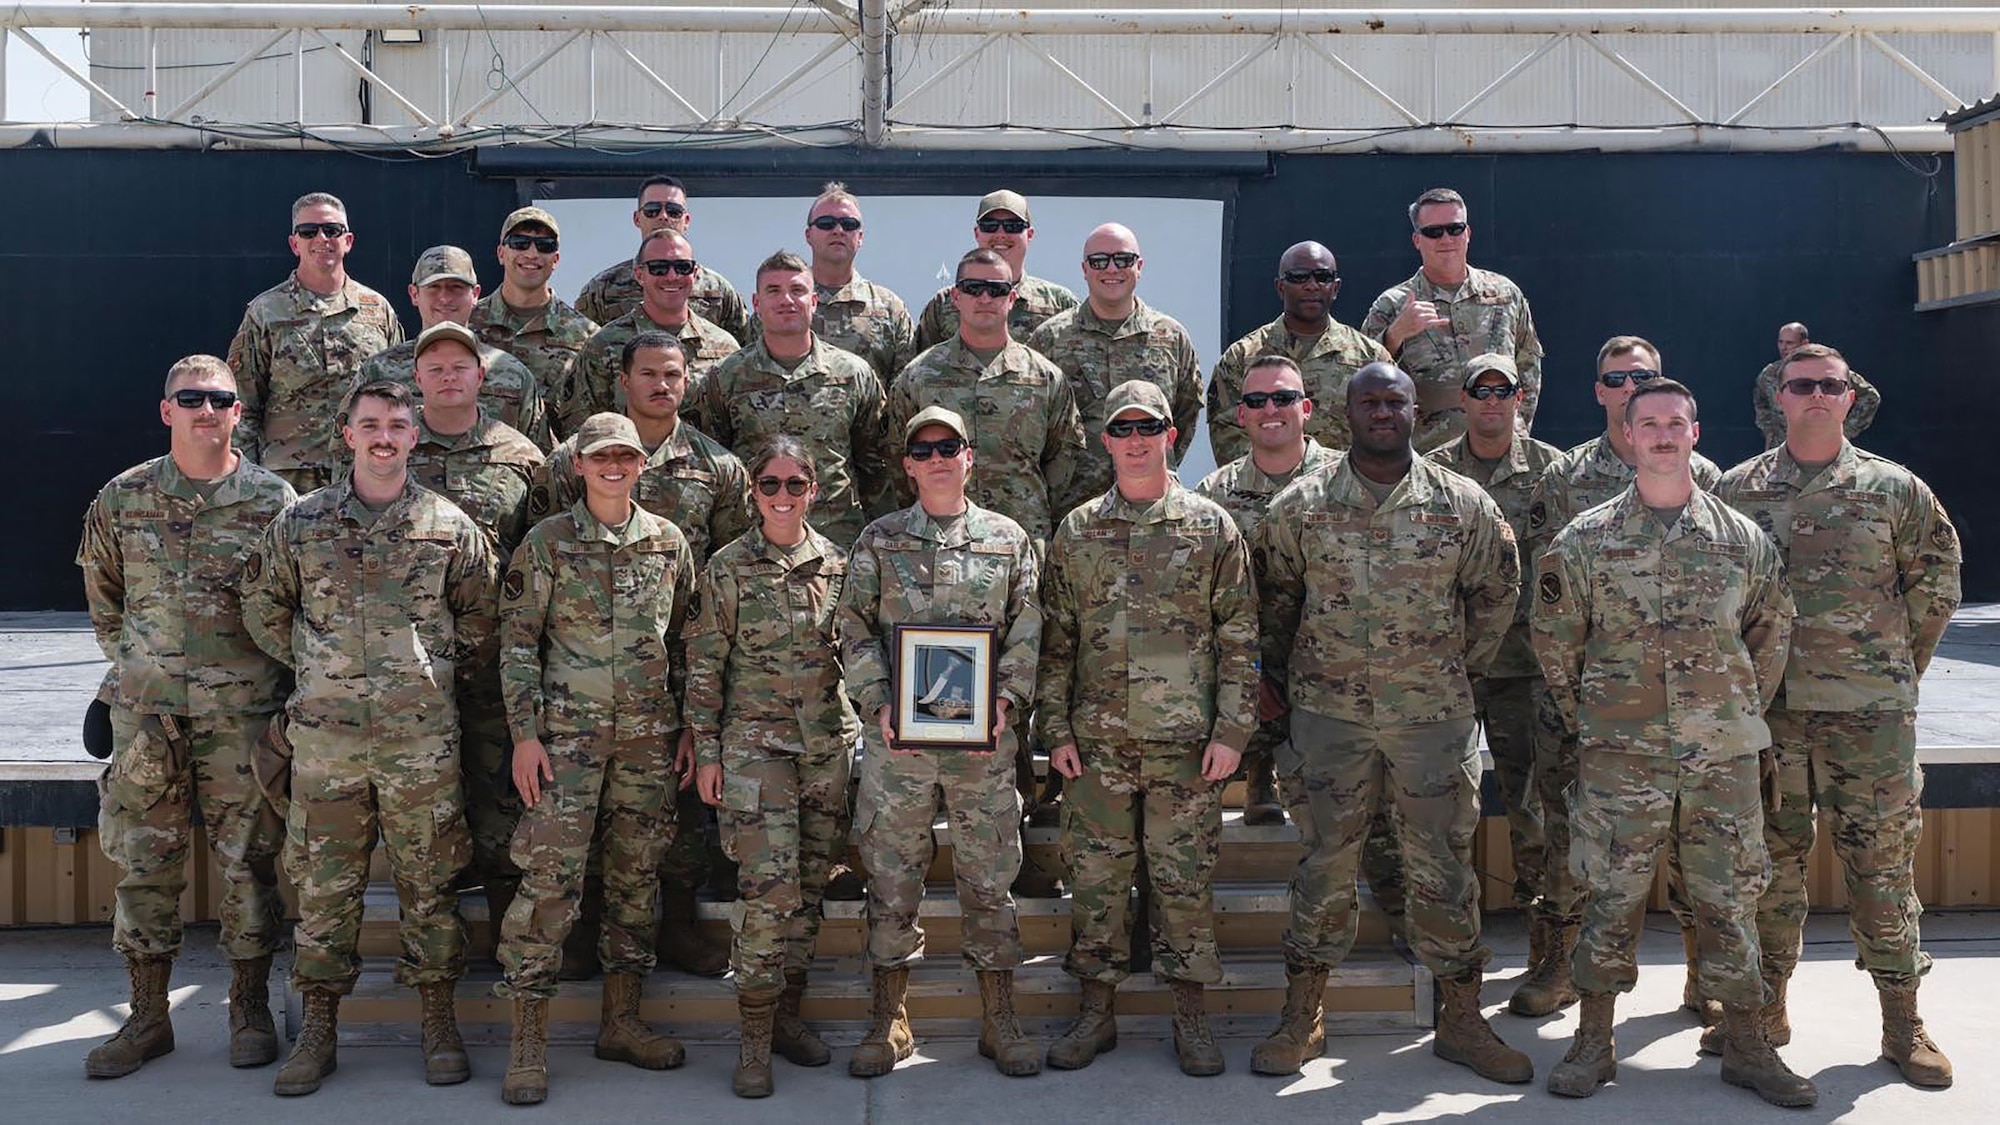 Airmen from the 87th Aerial Port Squadron pose with their award for 380th Air Expeditionary Wing team of the quarter at Al Dhafra Air Base, April 8, 2022. While assigned to the air transportation function in the 380th Expeditionary Logistics Readiness Squadron, the 29 Airmen worked 12-hour shifts, six days per week, coordinating cargo movement, passenger procedures, joint training exercises and more. (Courtesy photo)